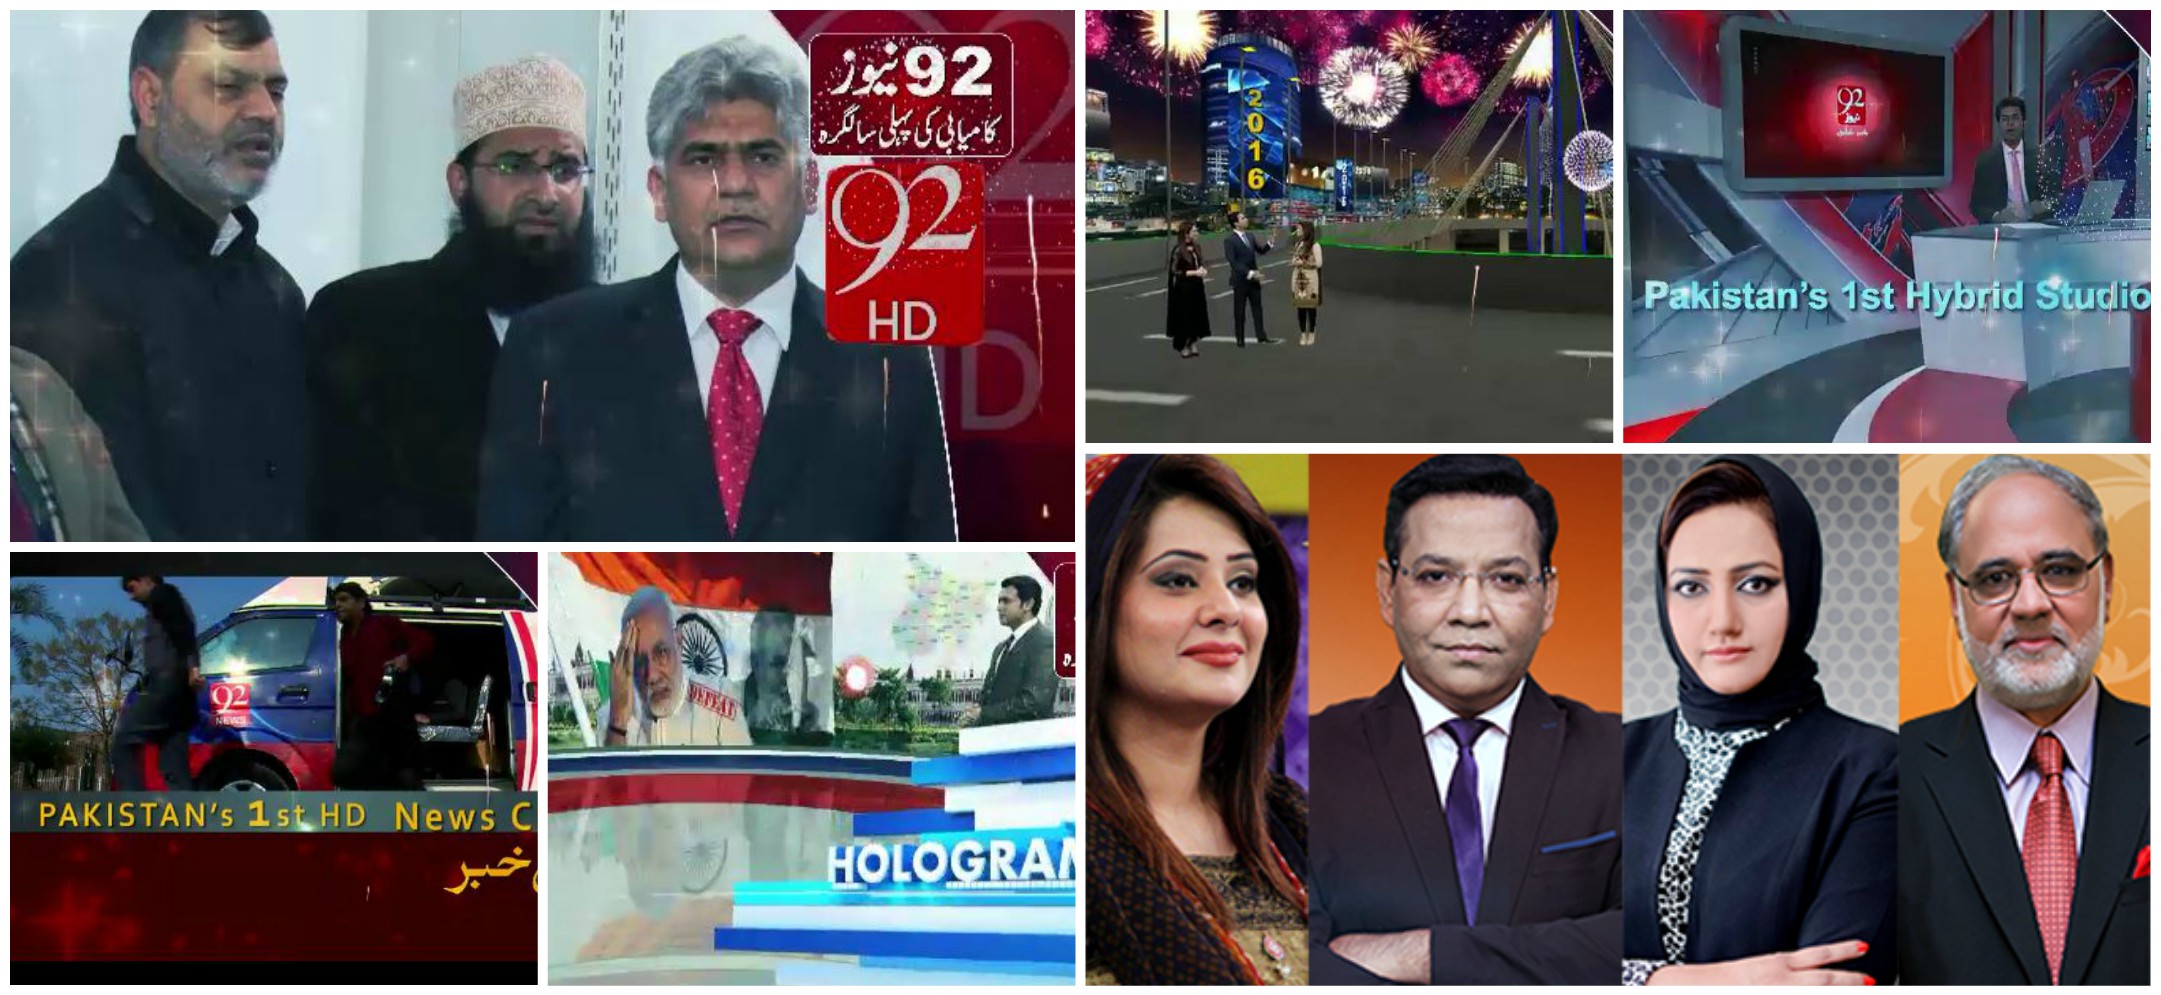 92 News, first HD channel in Pakistan, completes one year of success